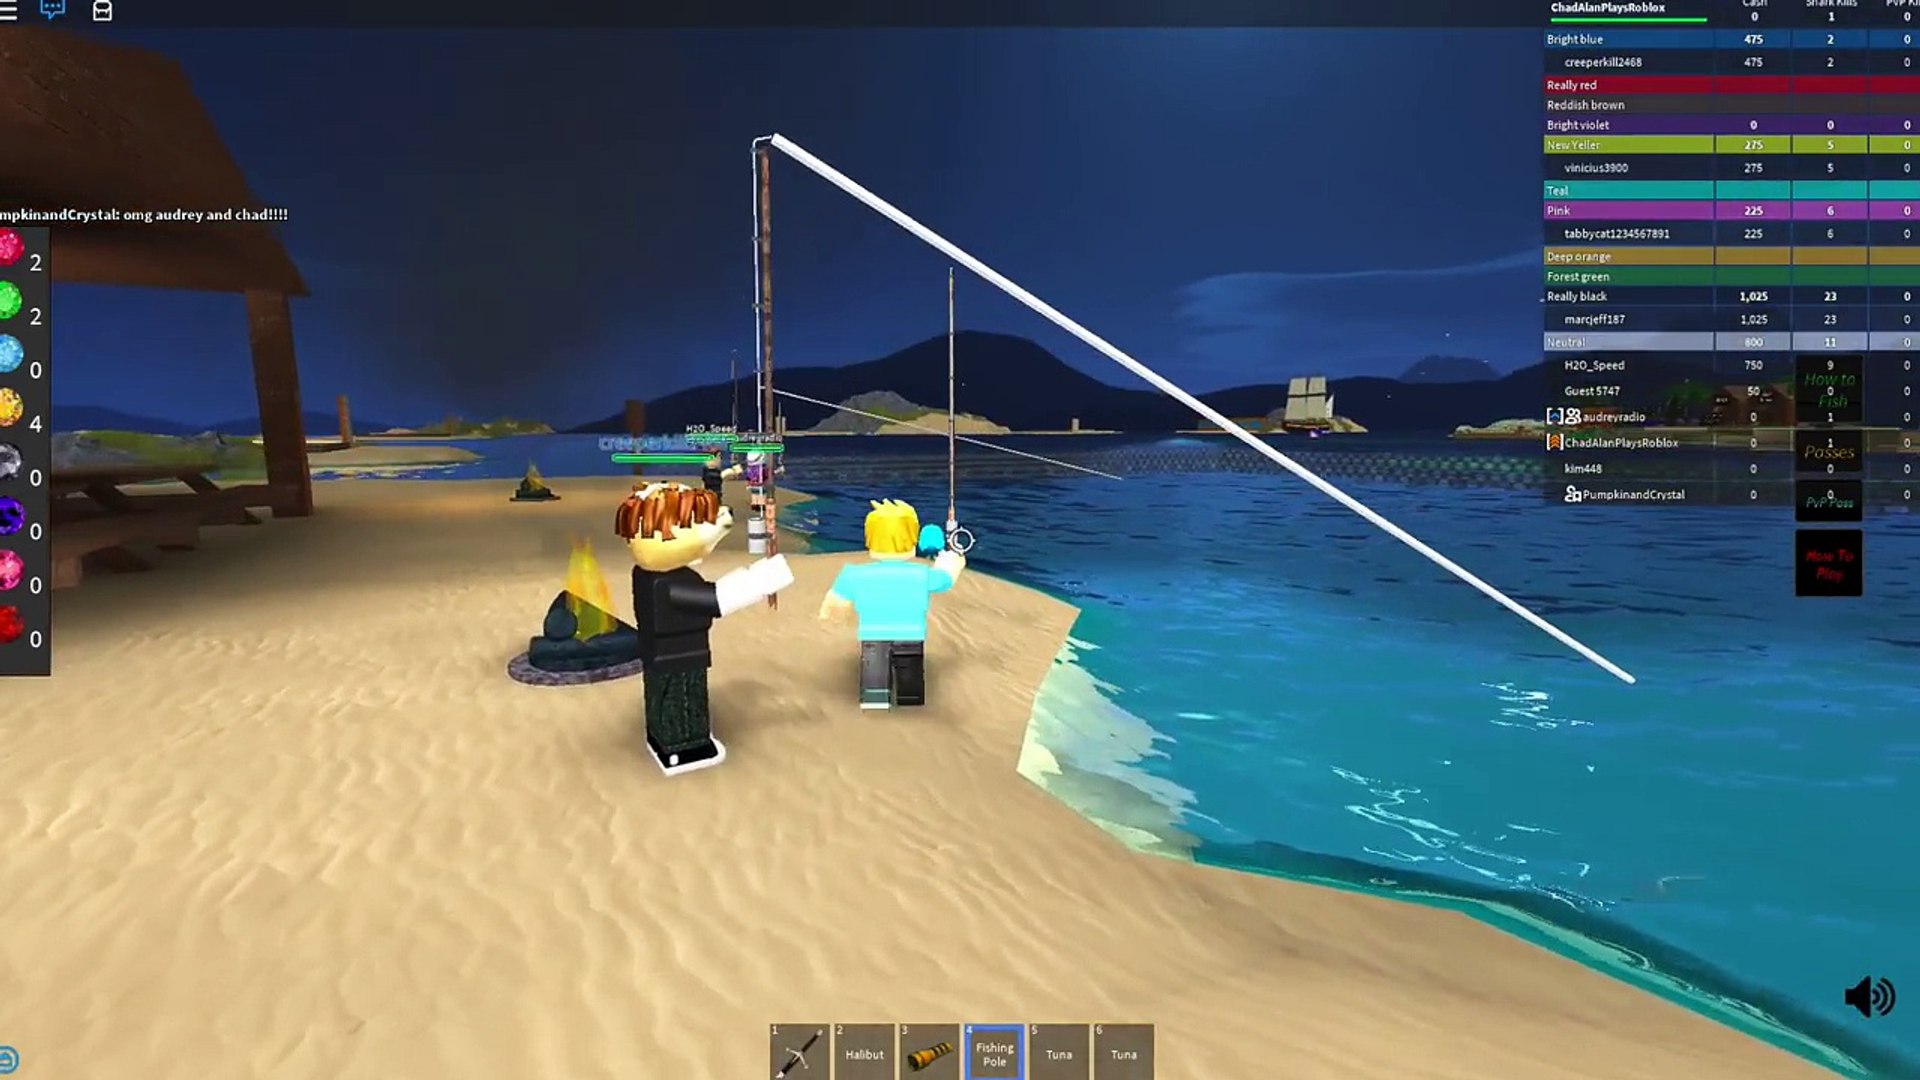 Roblox Shark Attack That Shark Tried To Eat Me Gamer Chad